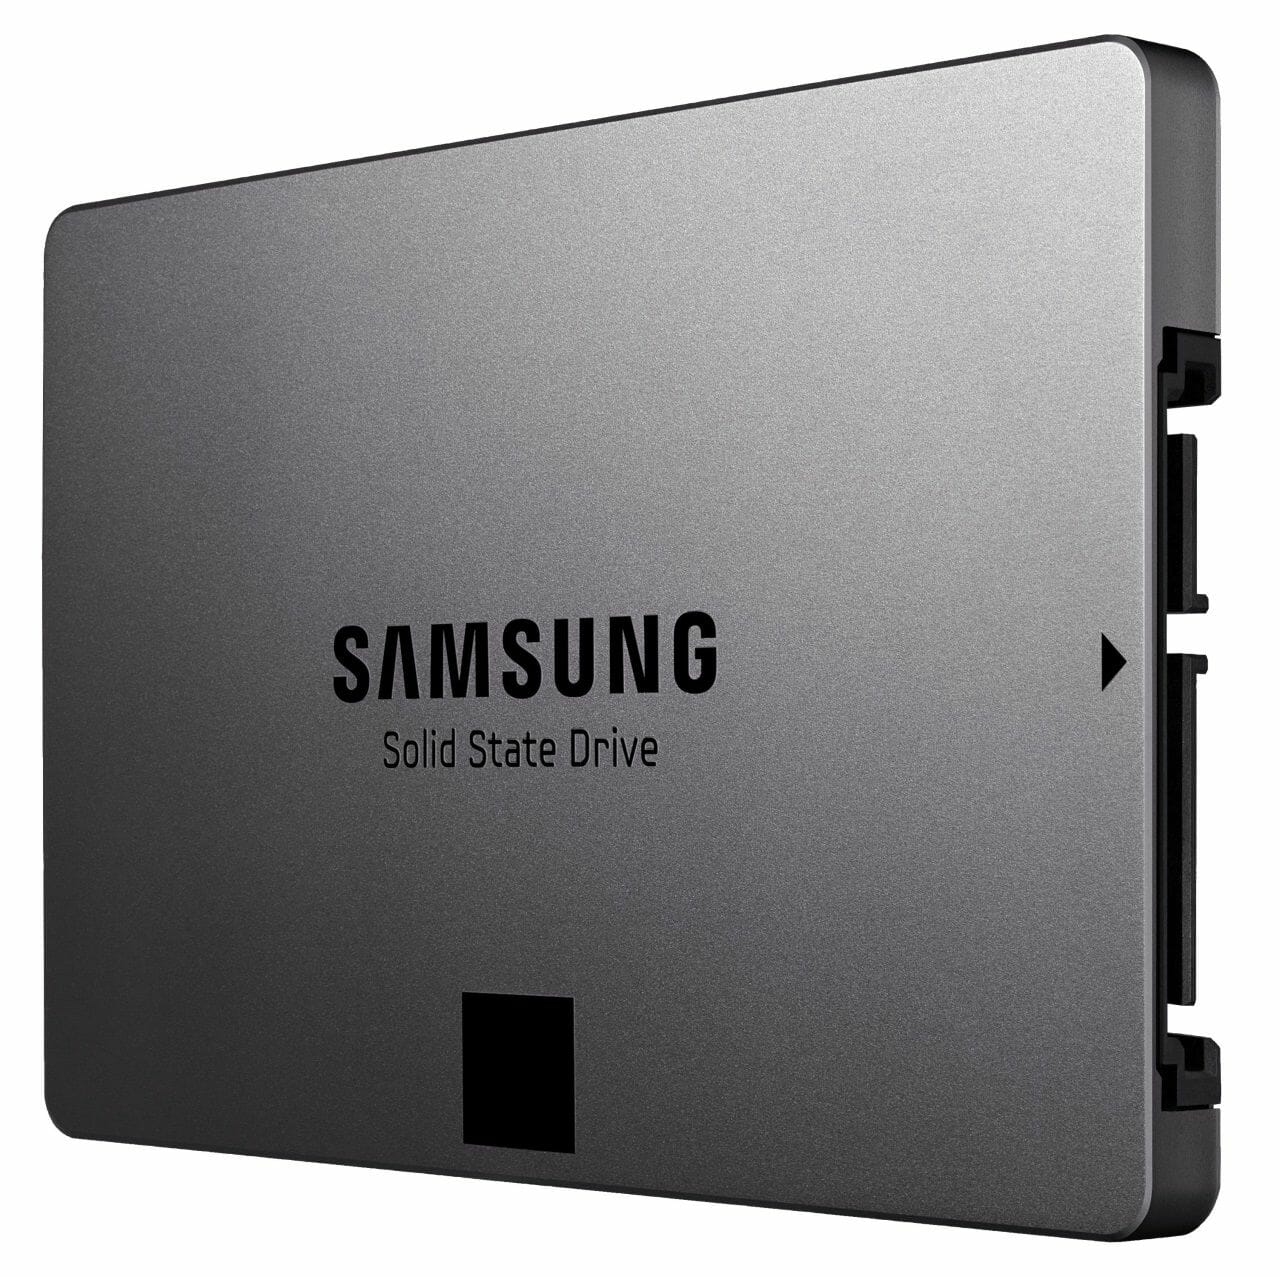 8 samsung solid state drive